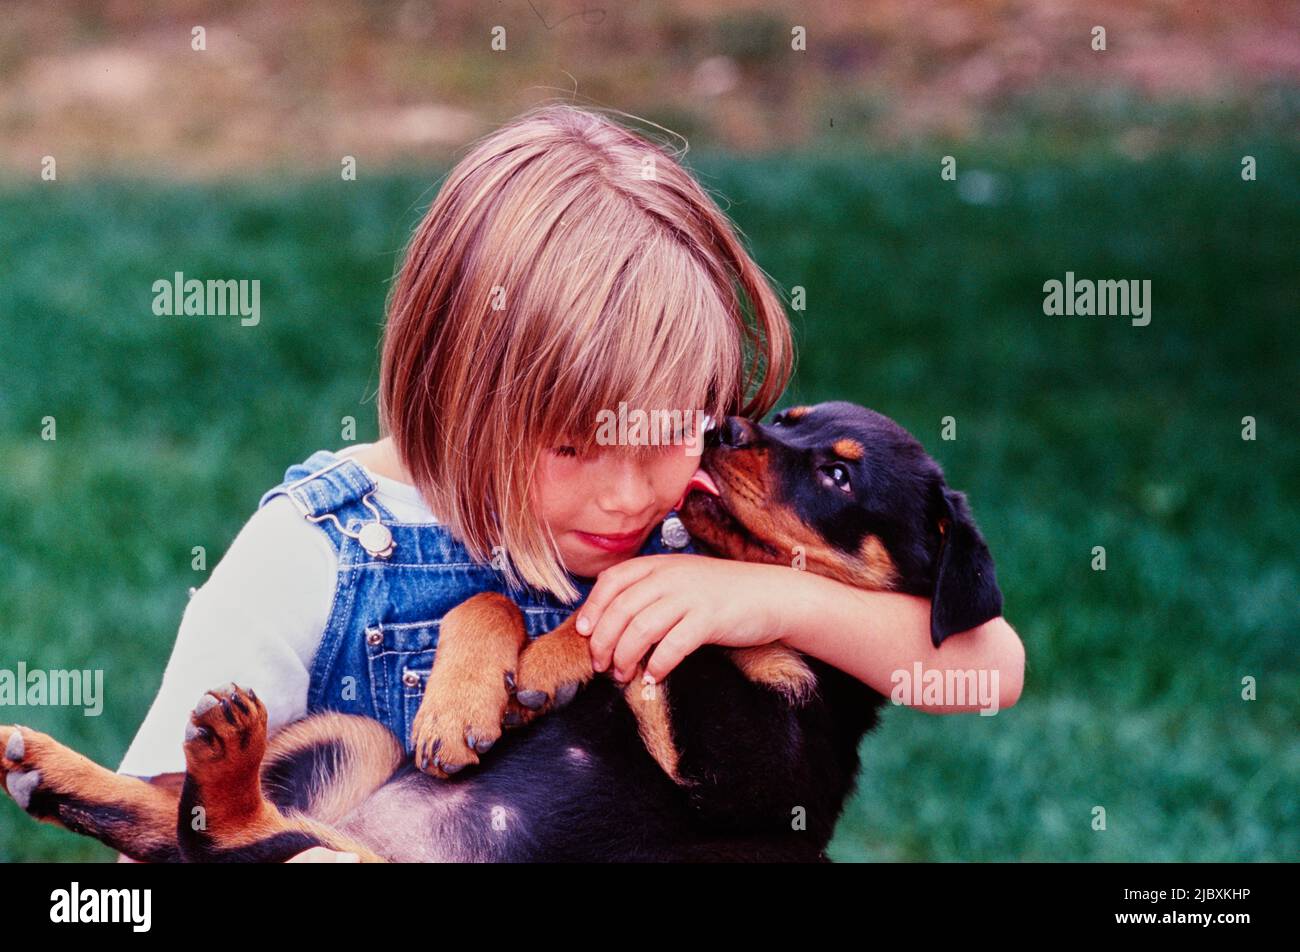 A young girl cuddling a rottweiler puppy dog Stock Photo